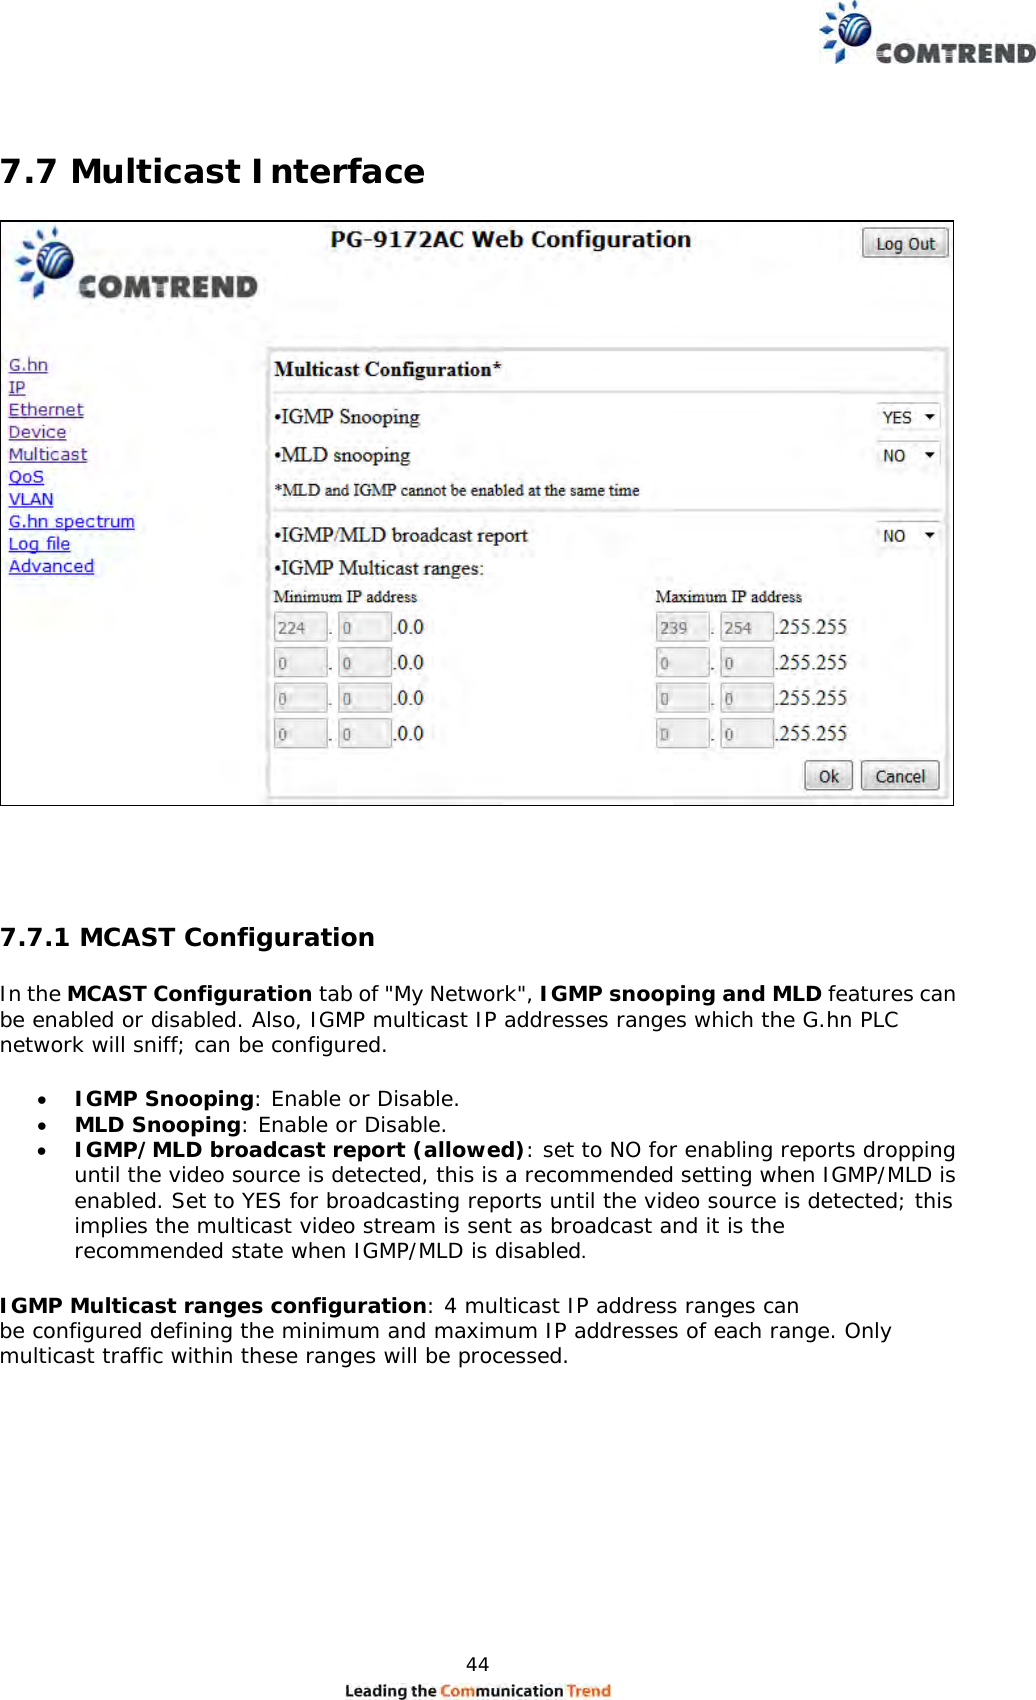  44   7.7 Multicast Interface    7.7.1 MCAST Configuration  In the MCAST Configuration tab of &quot;My Network&quot;, IGMP snooping and MLD features can be enabled or disabled. Also, IGMP multicast IP addresses ranges which the G.hn PLC network will sniff; can be configured.   IGMP Snooping: Enable or Disable.  MLD Snooping: Enable or Disable.  IGMP/MLD broadcast report (allowed): set to NO for enabling reports dropping until the video source is detected, this is a recommended setting when IGMP/MLD is enabled. Set to YES for broadcasting reports until the video source is detected; this implies the multicast video stream is sent as broadcast and it is the recommended state when IGMP/MLD is disabled.  IGMP Multicast ranges configuration: 4 multicast IP address ranges can be configured defining the minimum and maximum IP addresses of each range. Only multicast traffic within these ranges will be processed.  